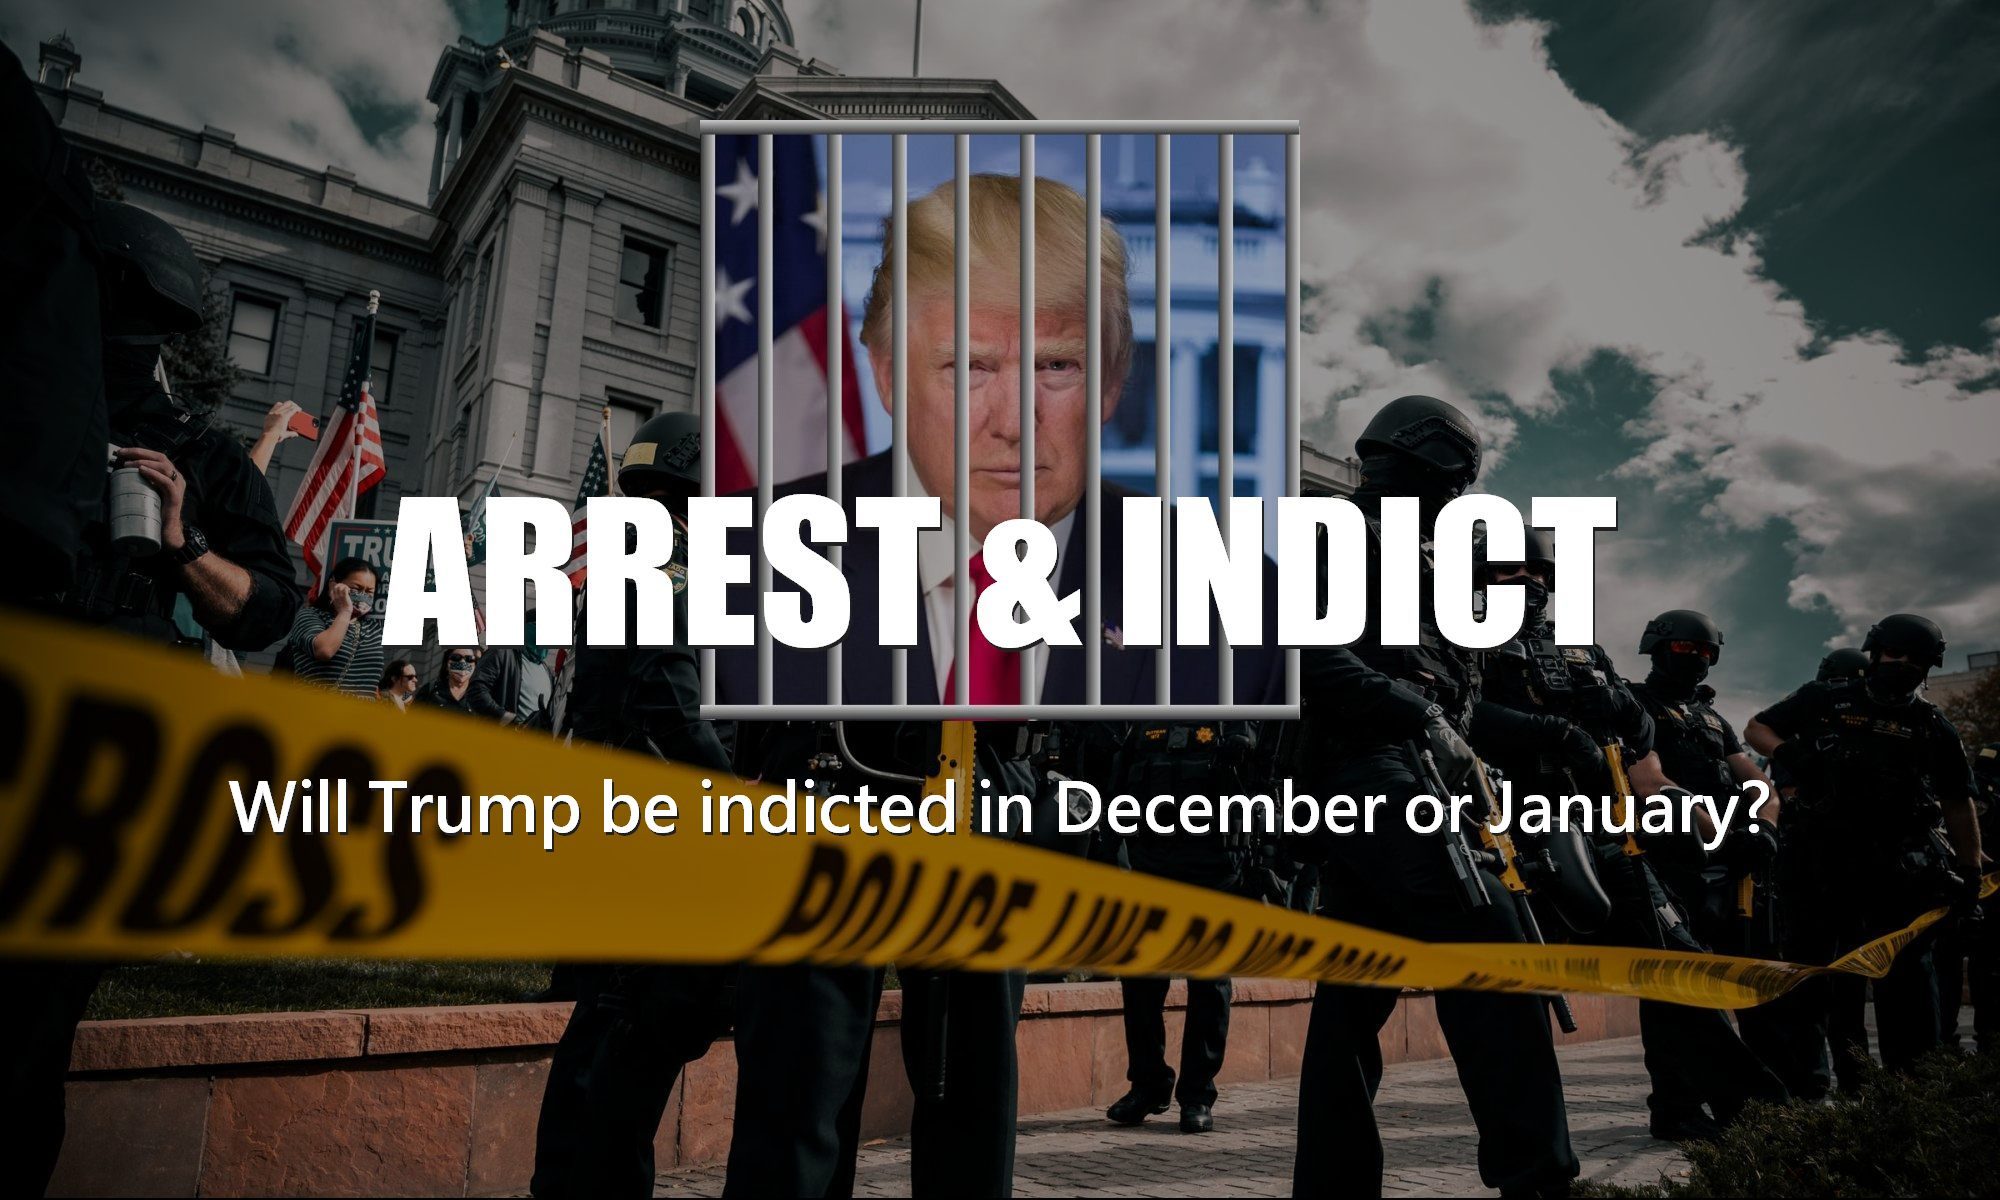 Will Trump be indicted in march or April? Trump arrested news — Mar-a-Lago arrest this month and year